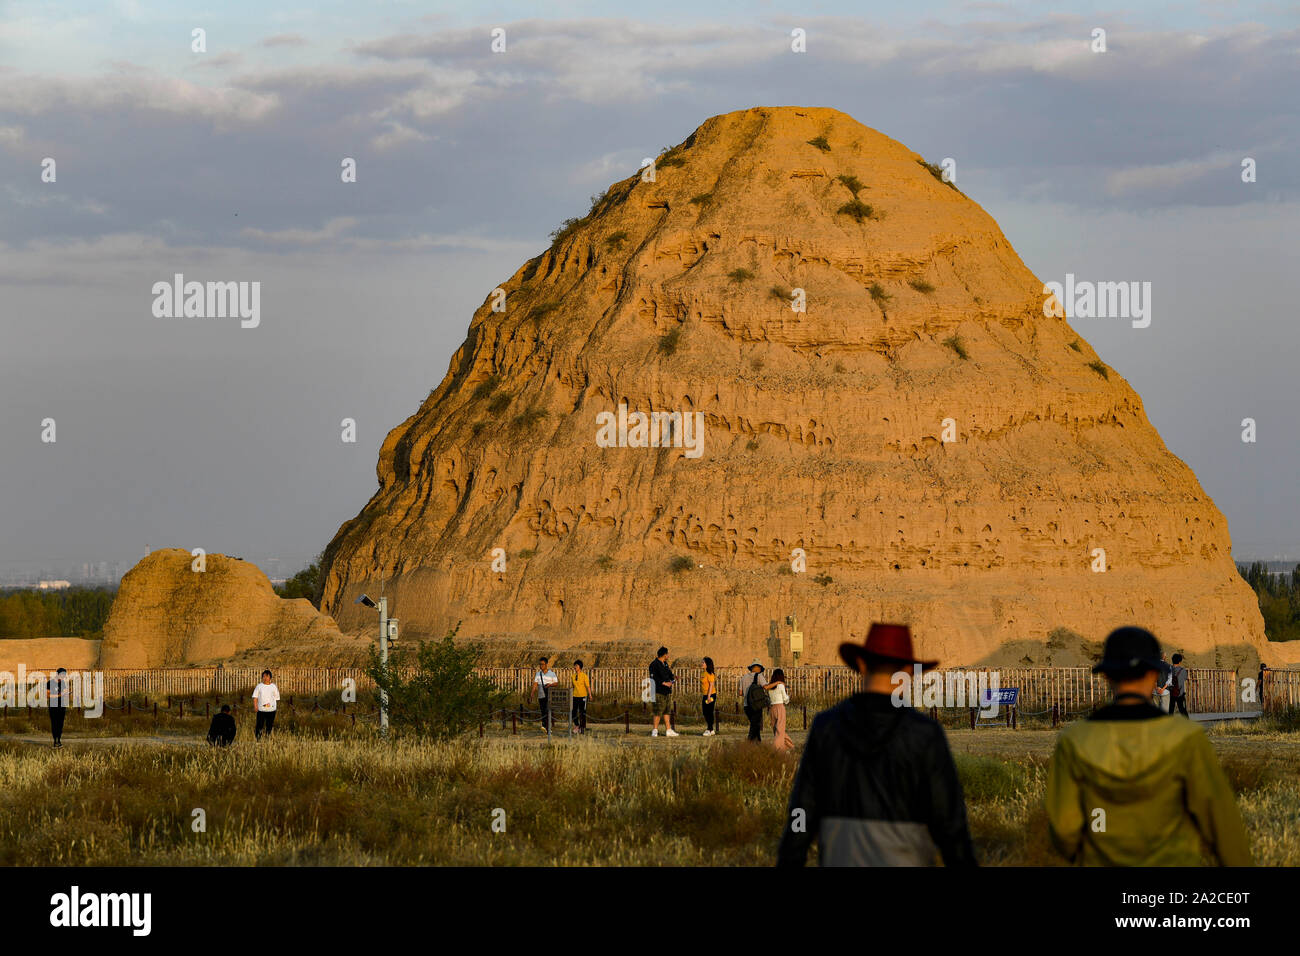 Yinchuan. 2nd Oct, 2019. Tourists visit the imperial tombs dating back to the Western Xia Dynasty (1032-1227) in Yinchuan, capital of northwest China's Ningxia Hui Autonomous Region, Oct. 2, 2019, the second day of the 7-day-long National Day holiday. Credit: Feng Kaihua/Xinhua/Alamy Live News Stock Photo